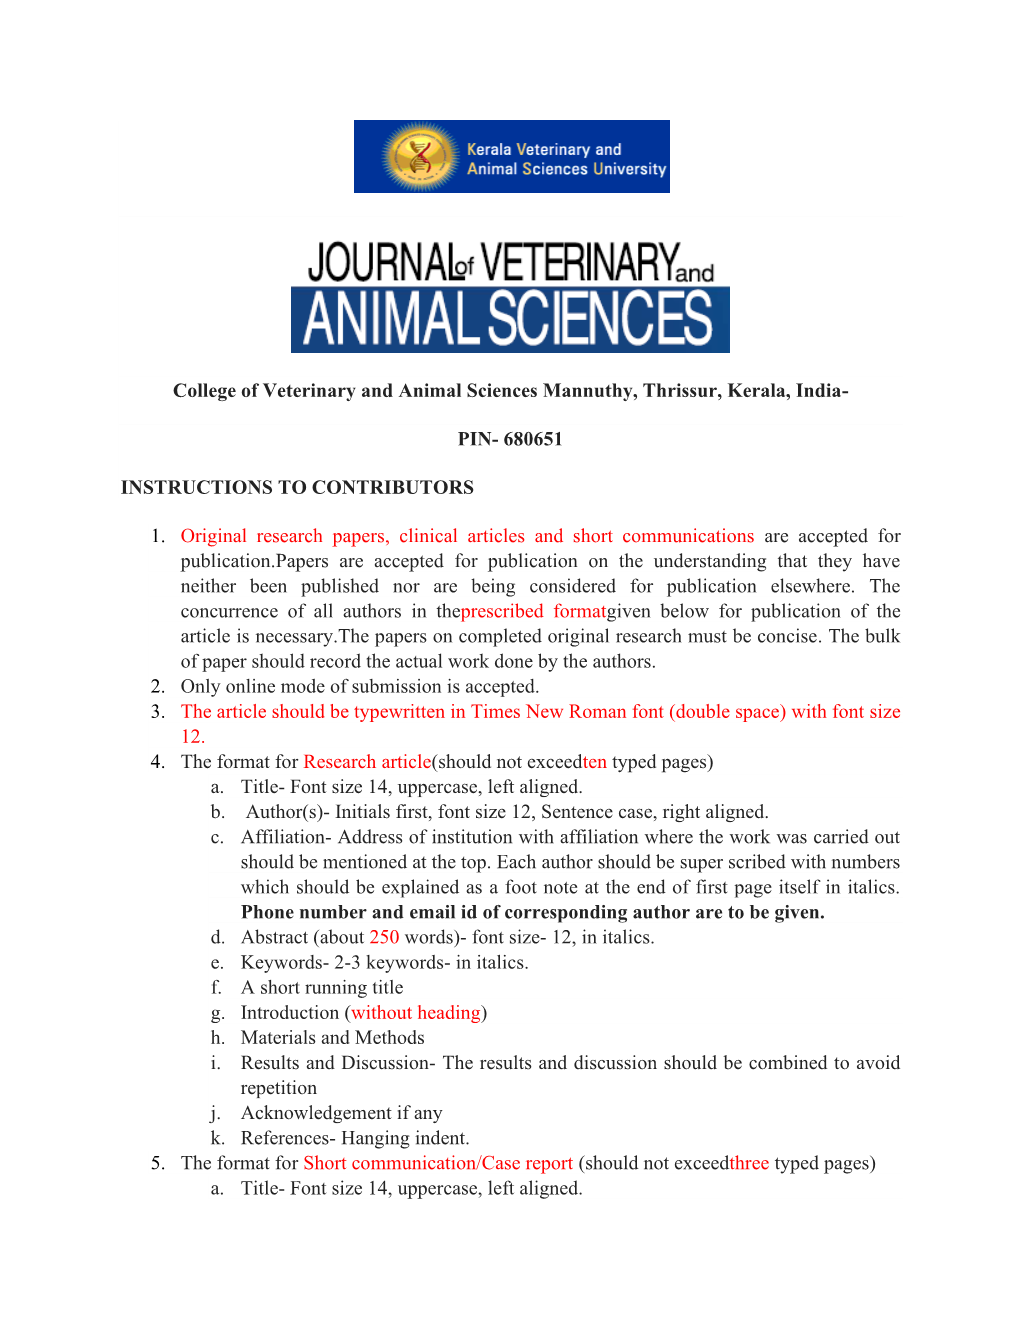 College of Veterinary and Animal Sciences Mannuthy, Thrissur, Kerala, India